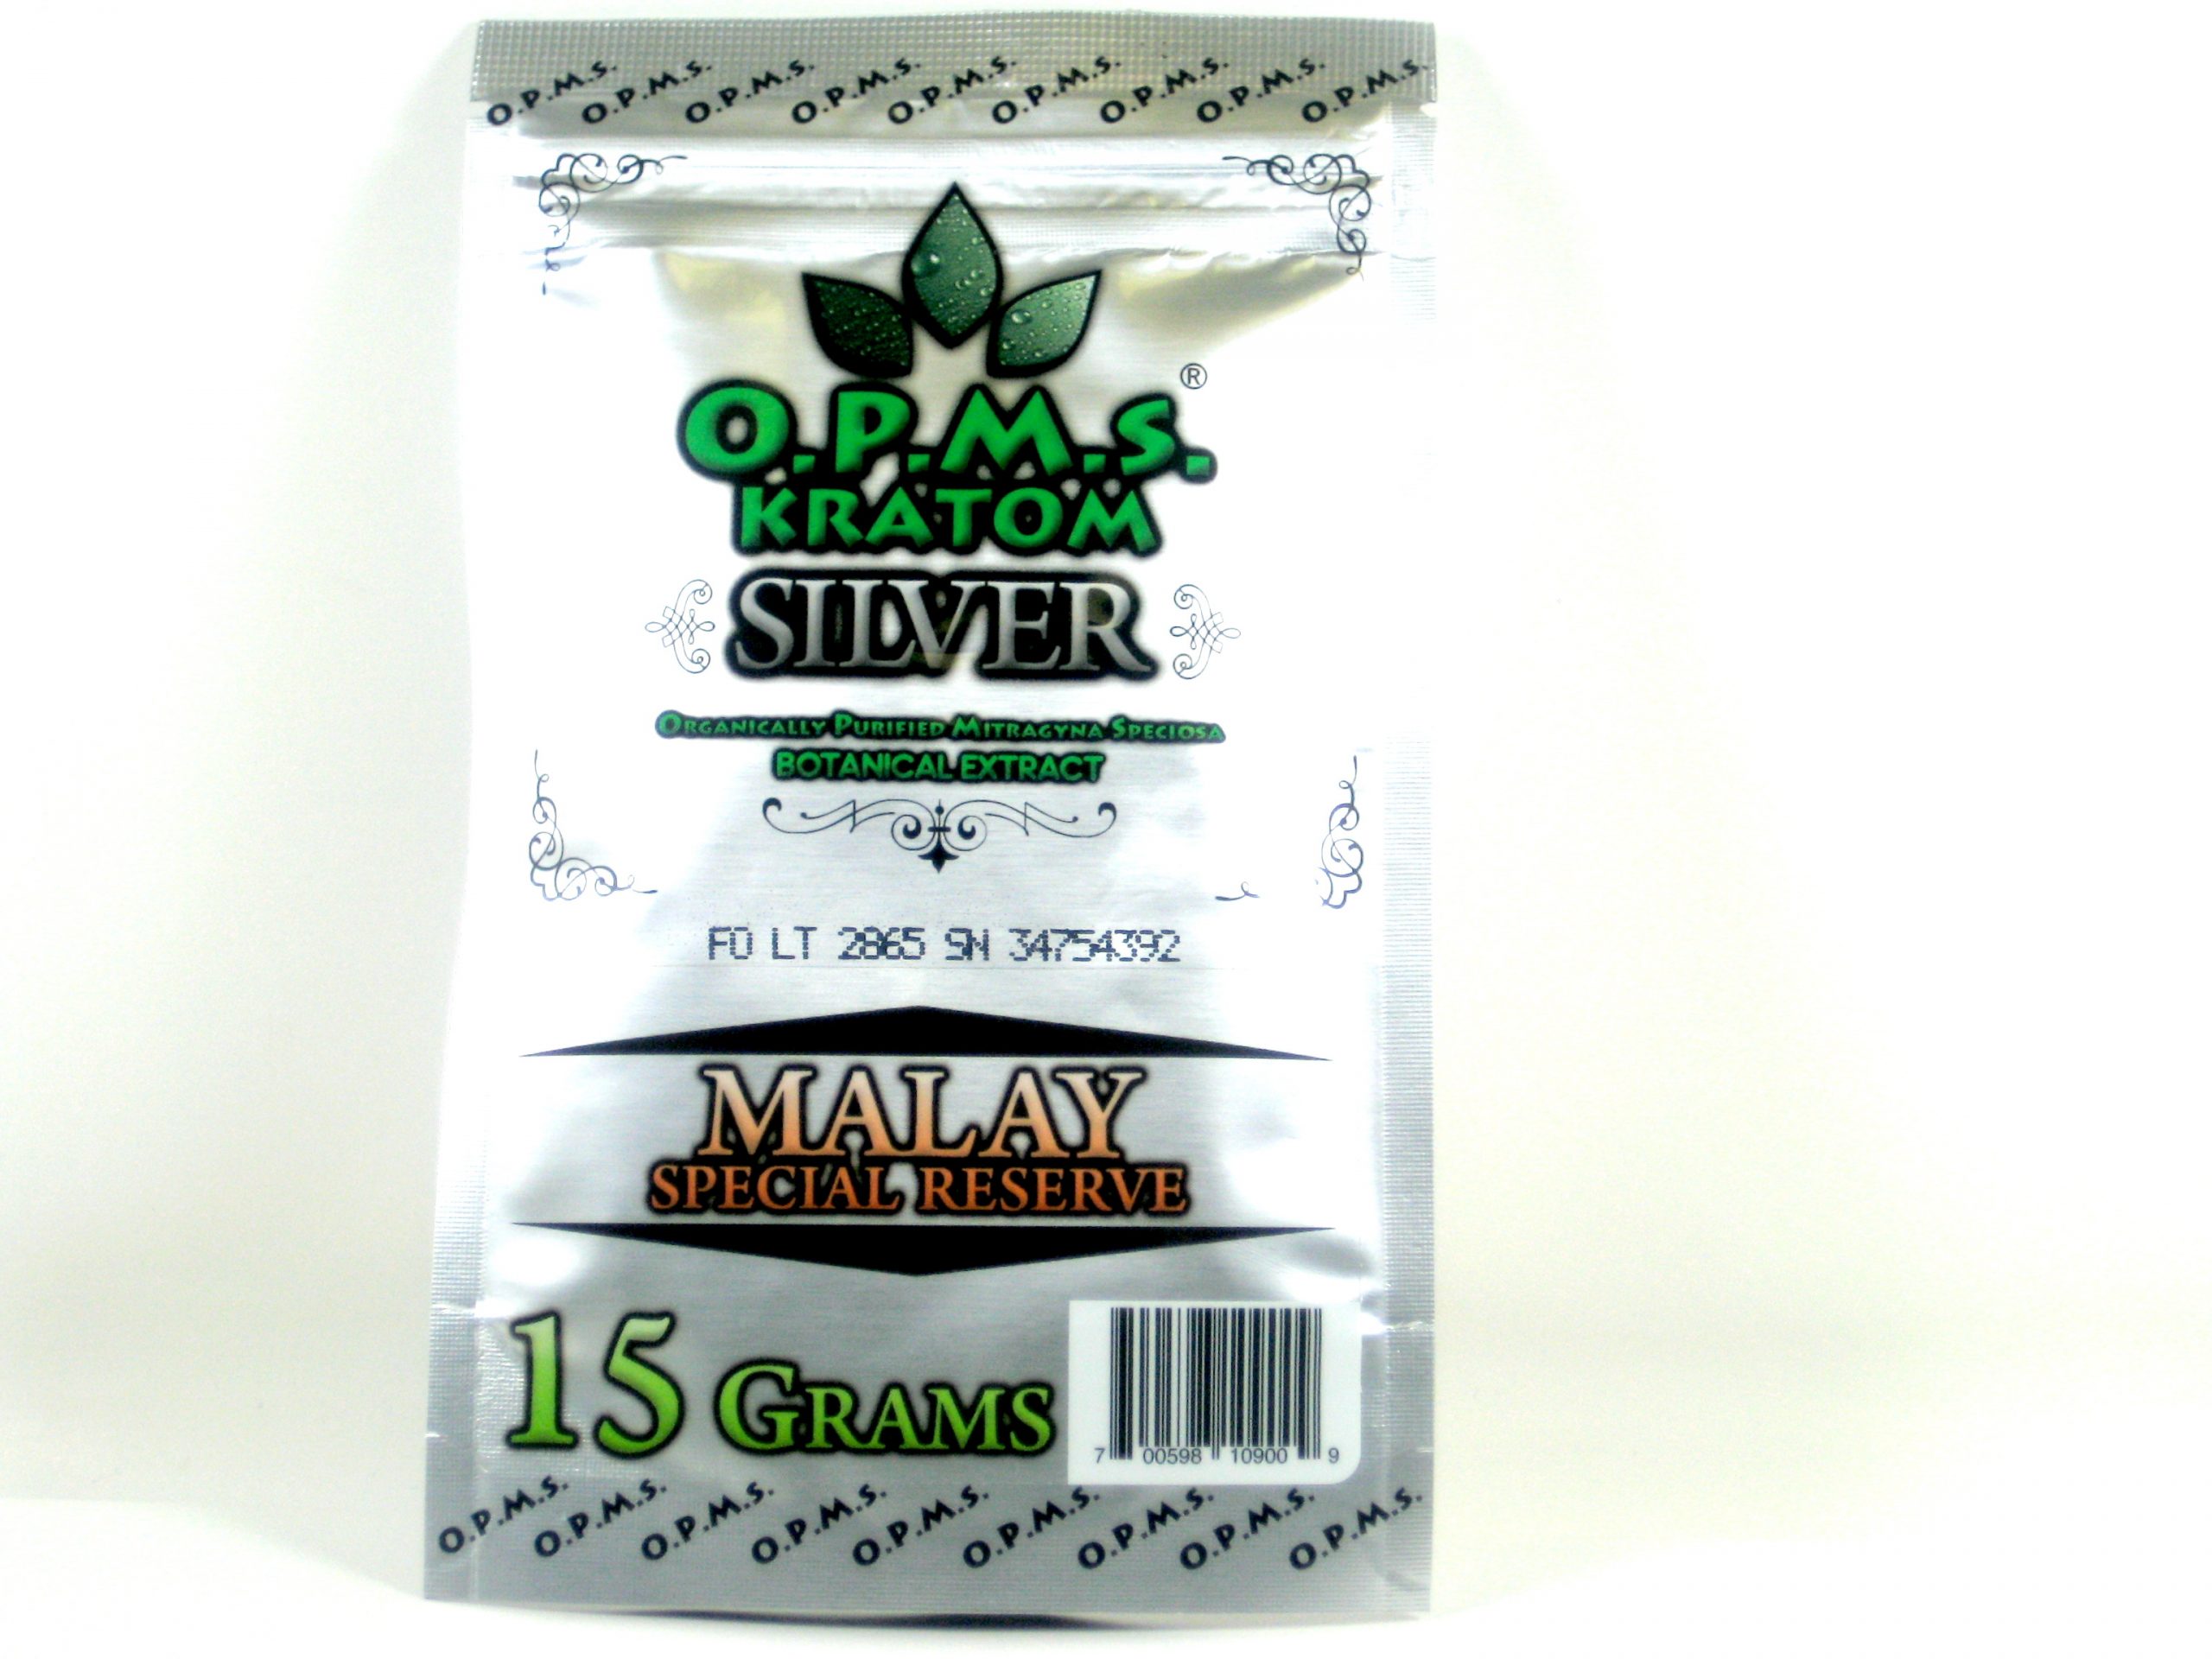 OPMS kratom Silver Malay Special Reserve 15g-30 caps